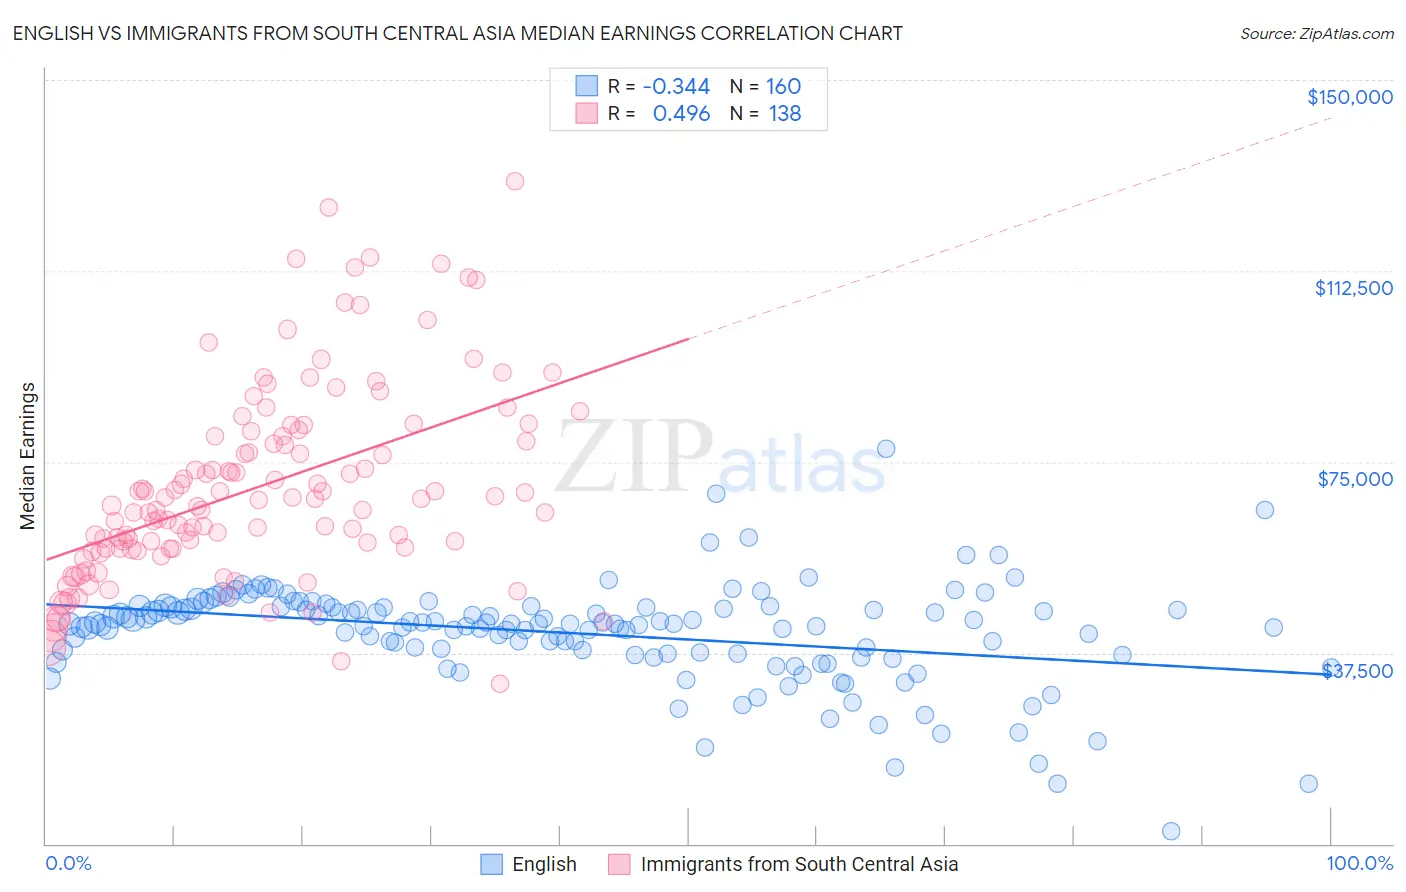 English vs Immigrants from South Central Asia Median Earnings